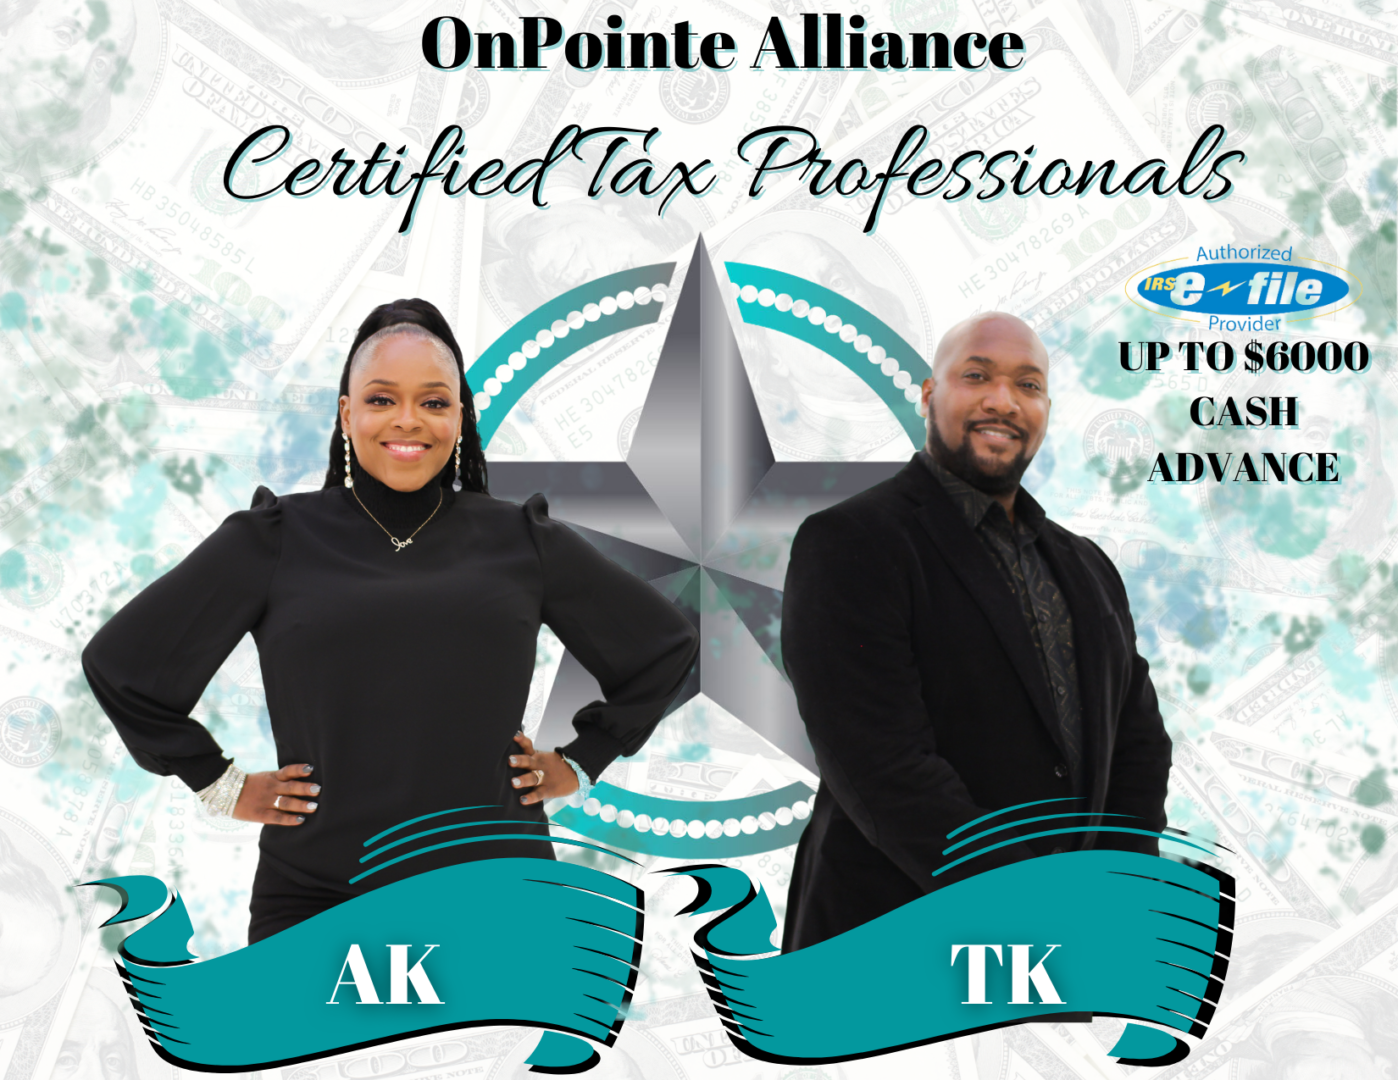 Two certified tax professionals